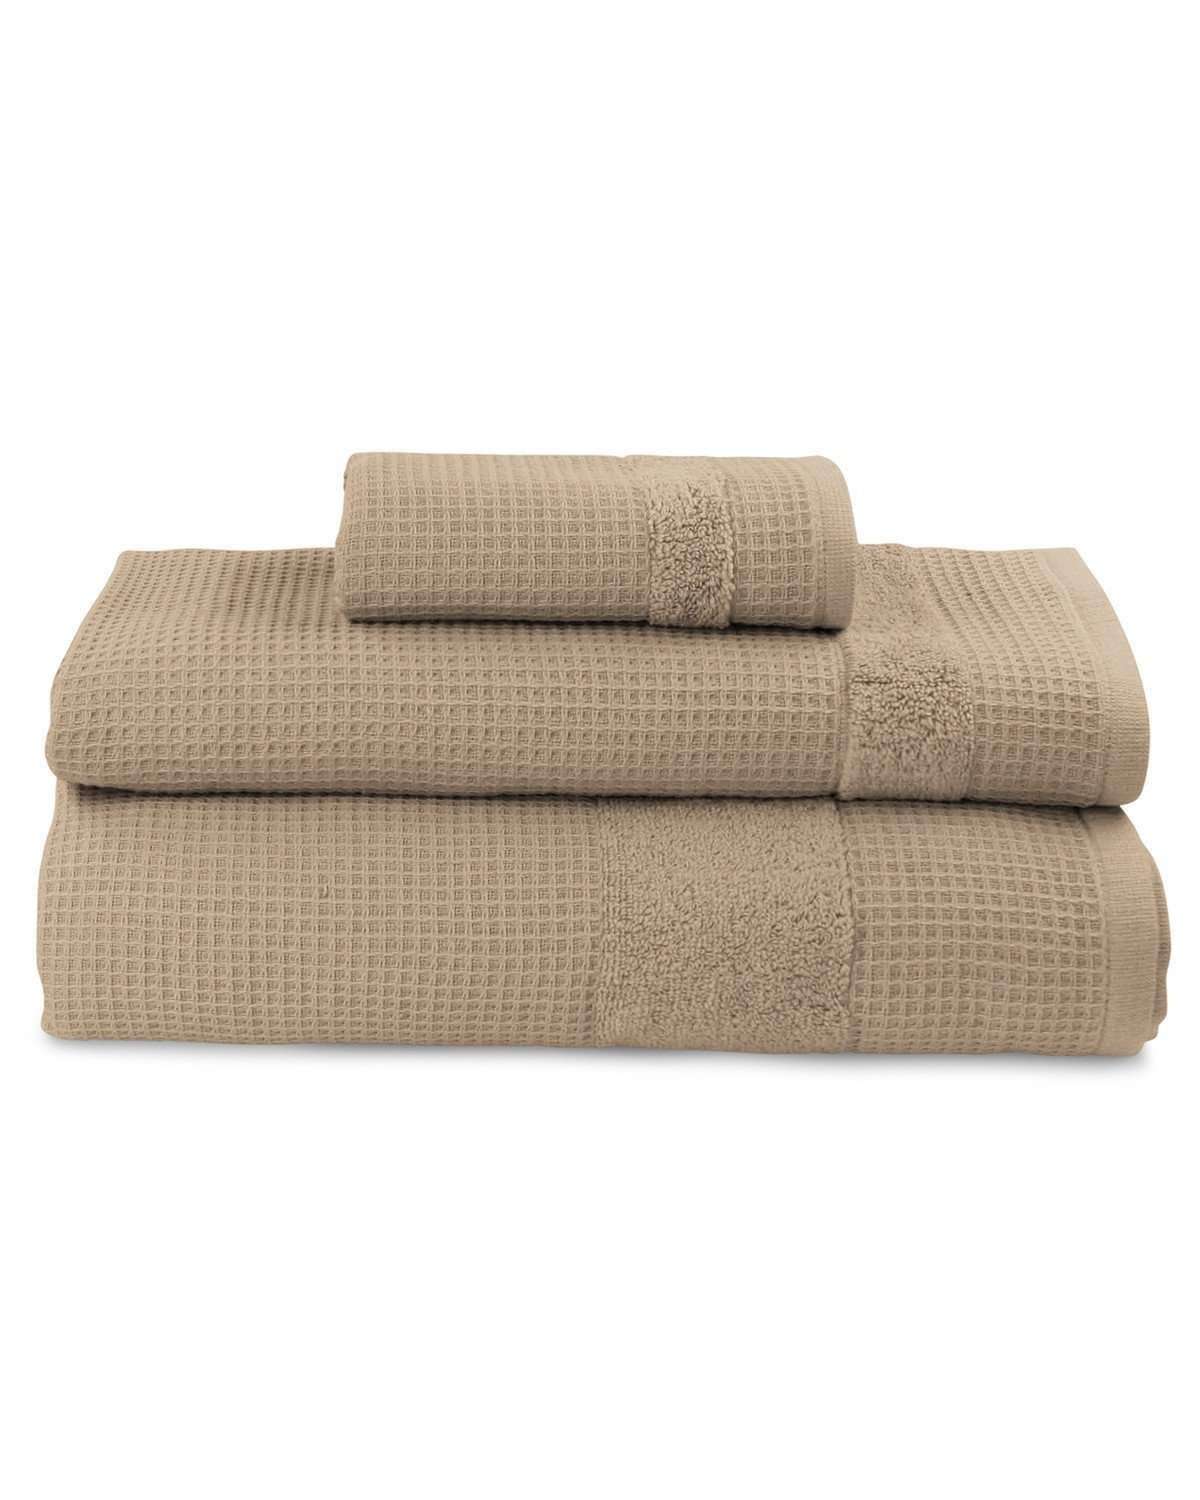 Buonaparte Egyptian Cotton Waffle Luxury Spa Towel Collection, Size: Hand Towel, Beige